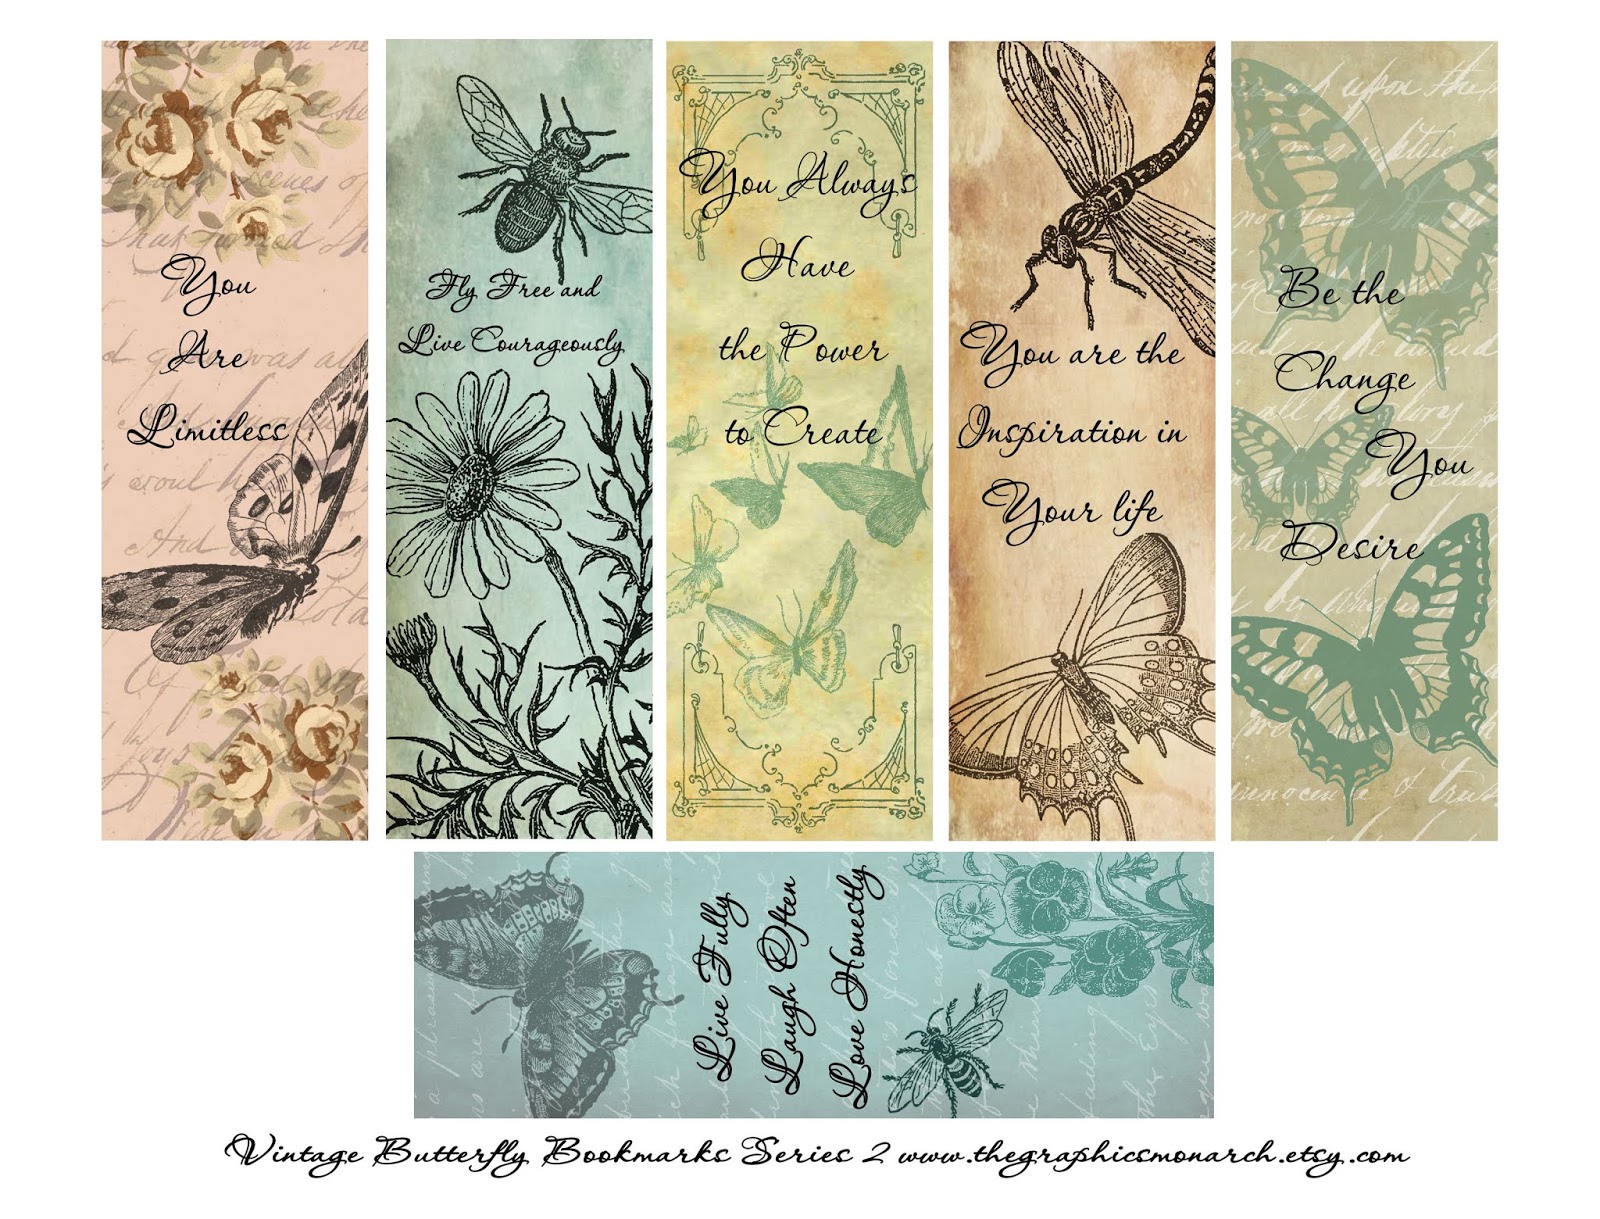 the-graphics-monarch-royalty-free-bookmarks-digital-craft-idea